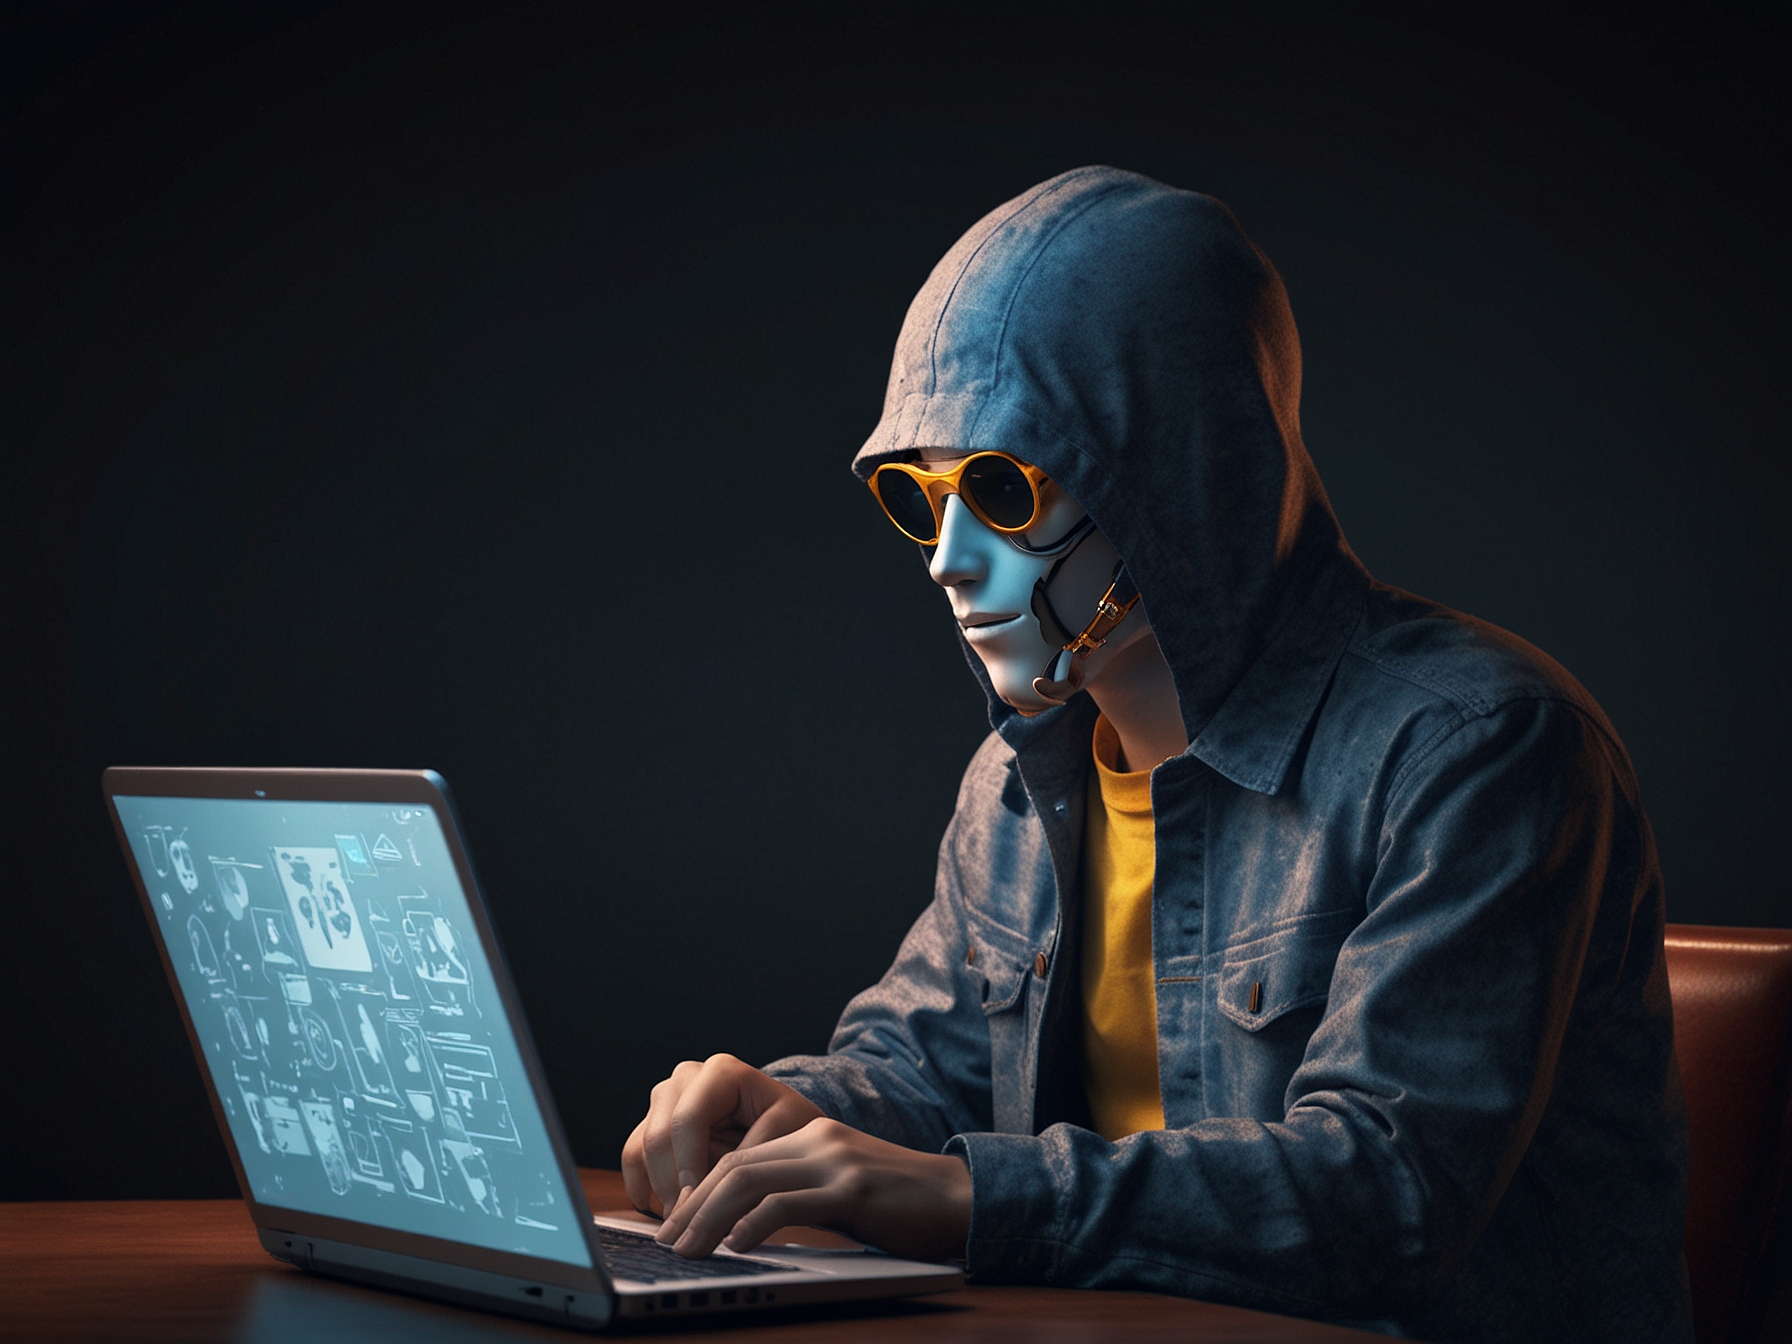 An image of a Meta Quest user browsing online, highlighting the importance of caution when downloading software and verifying websites to avoid scams.